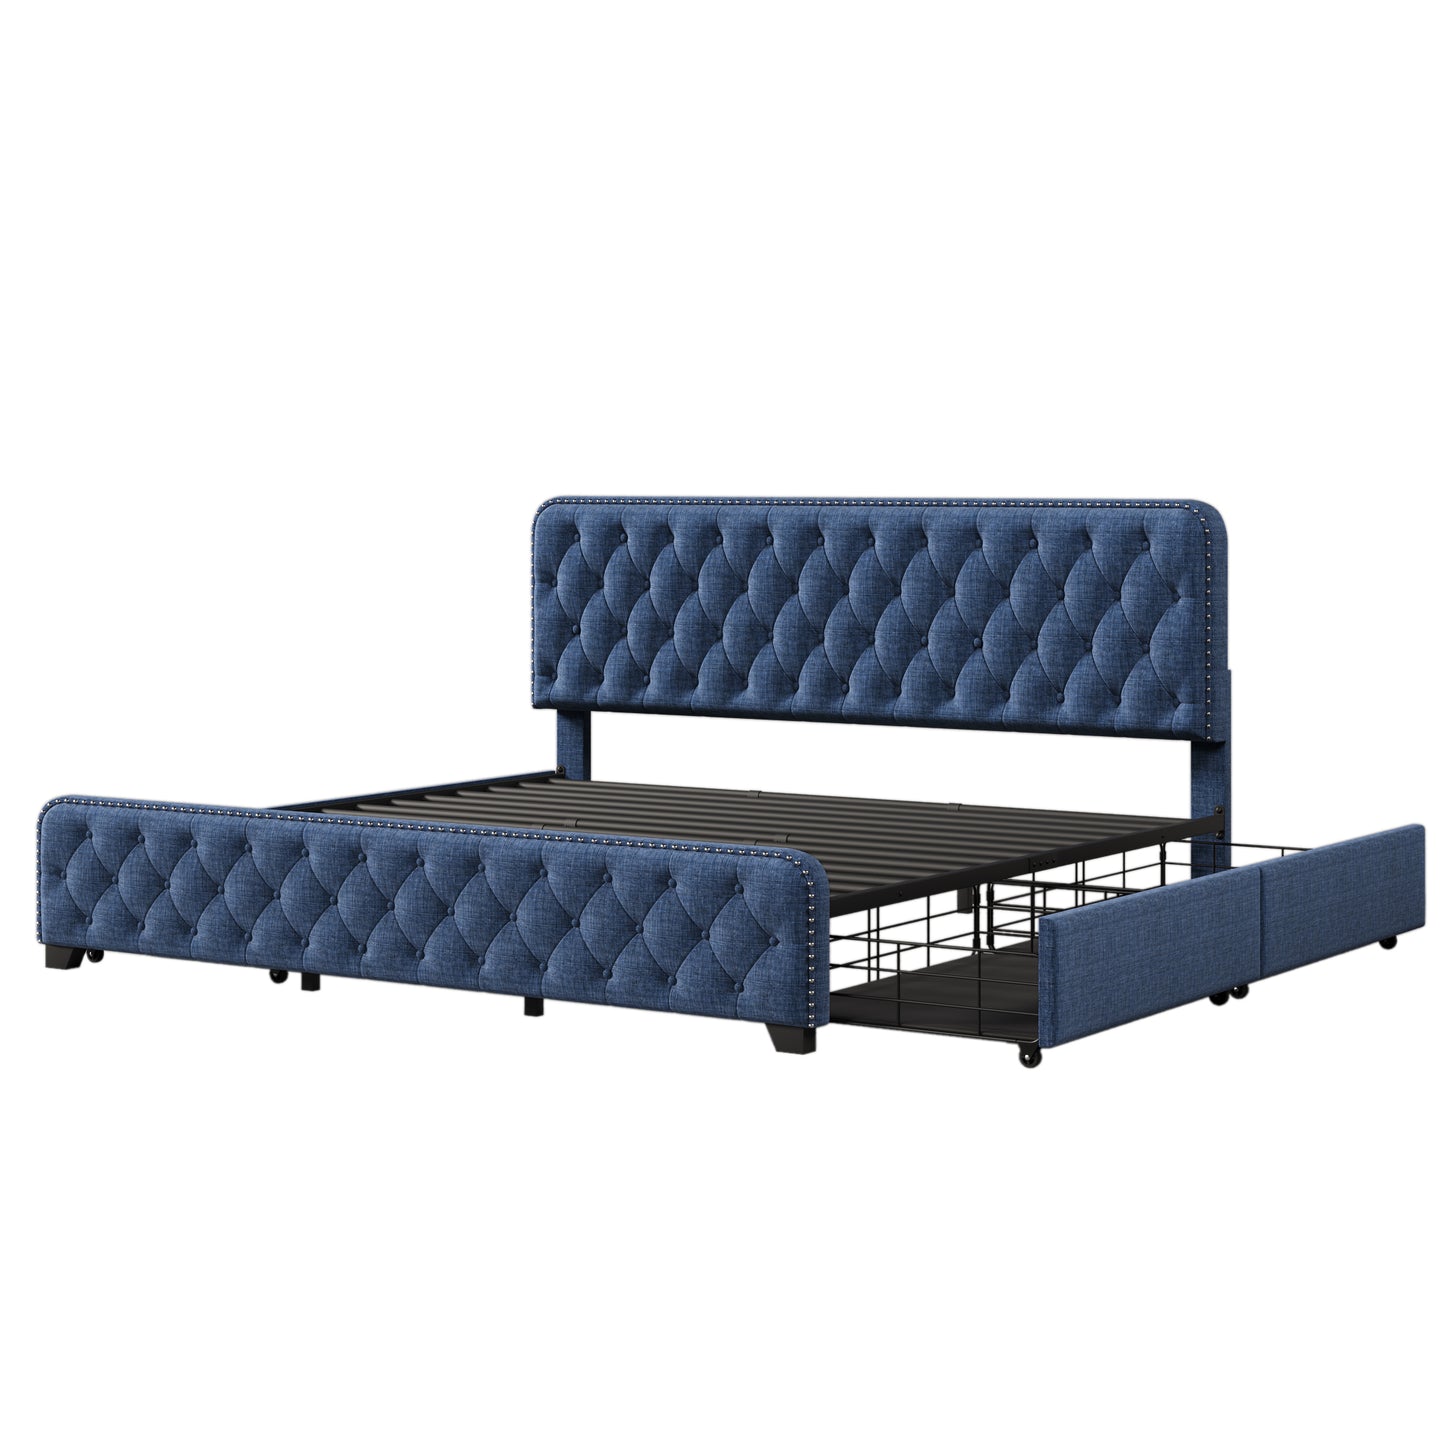 Upholstered Platform Bed Frame with Four Drawers, Button Tufted Headboard and Footboard Sturdy Metal Support, No Box Spring Required, Blue, King